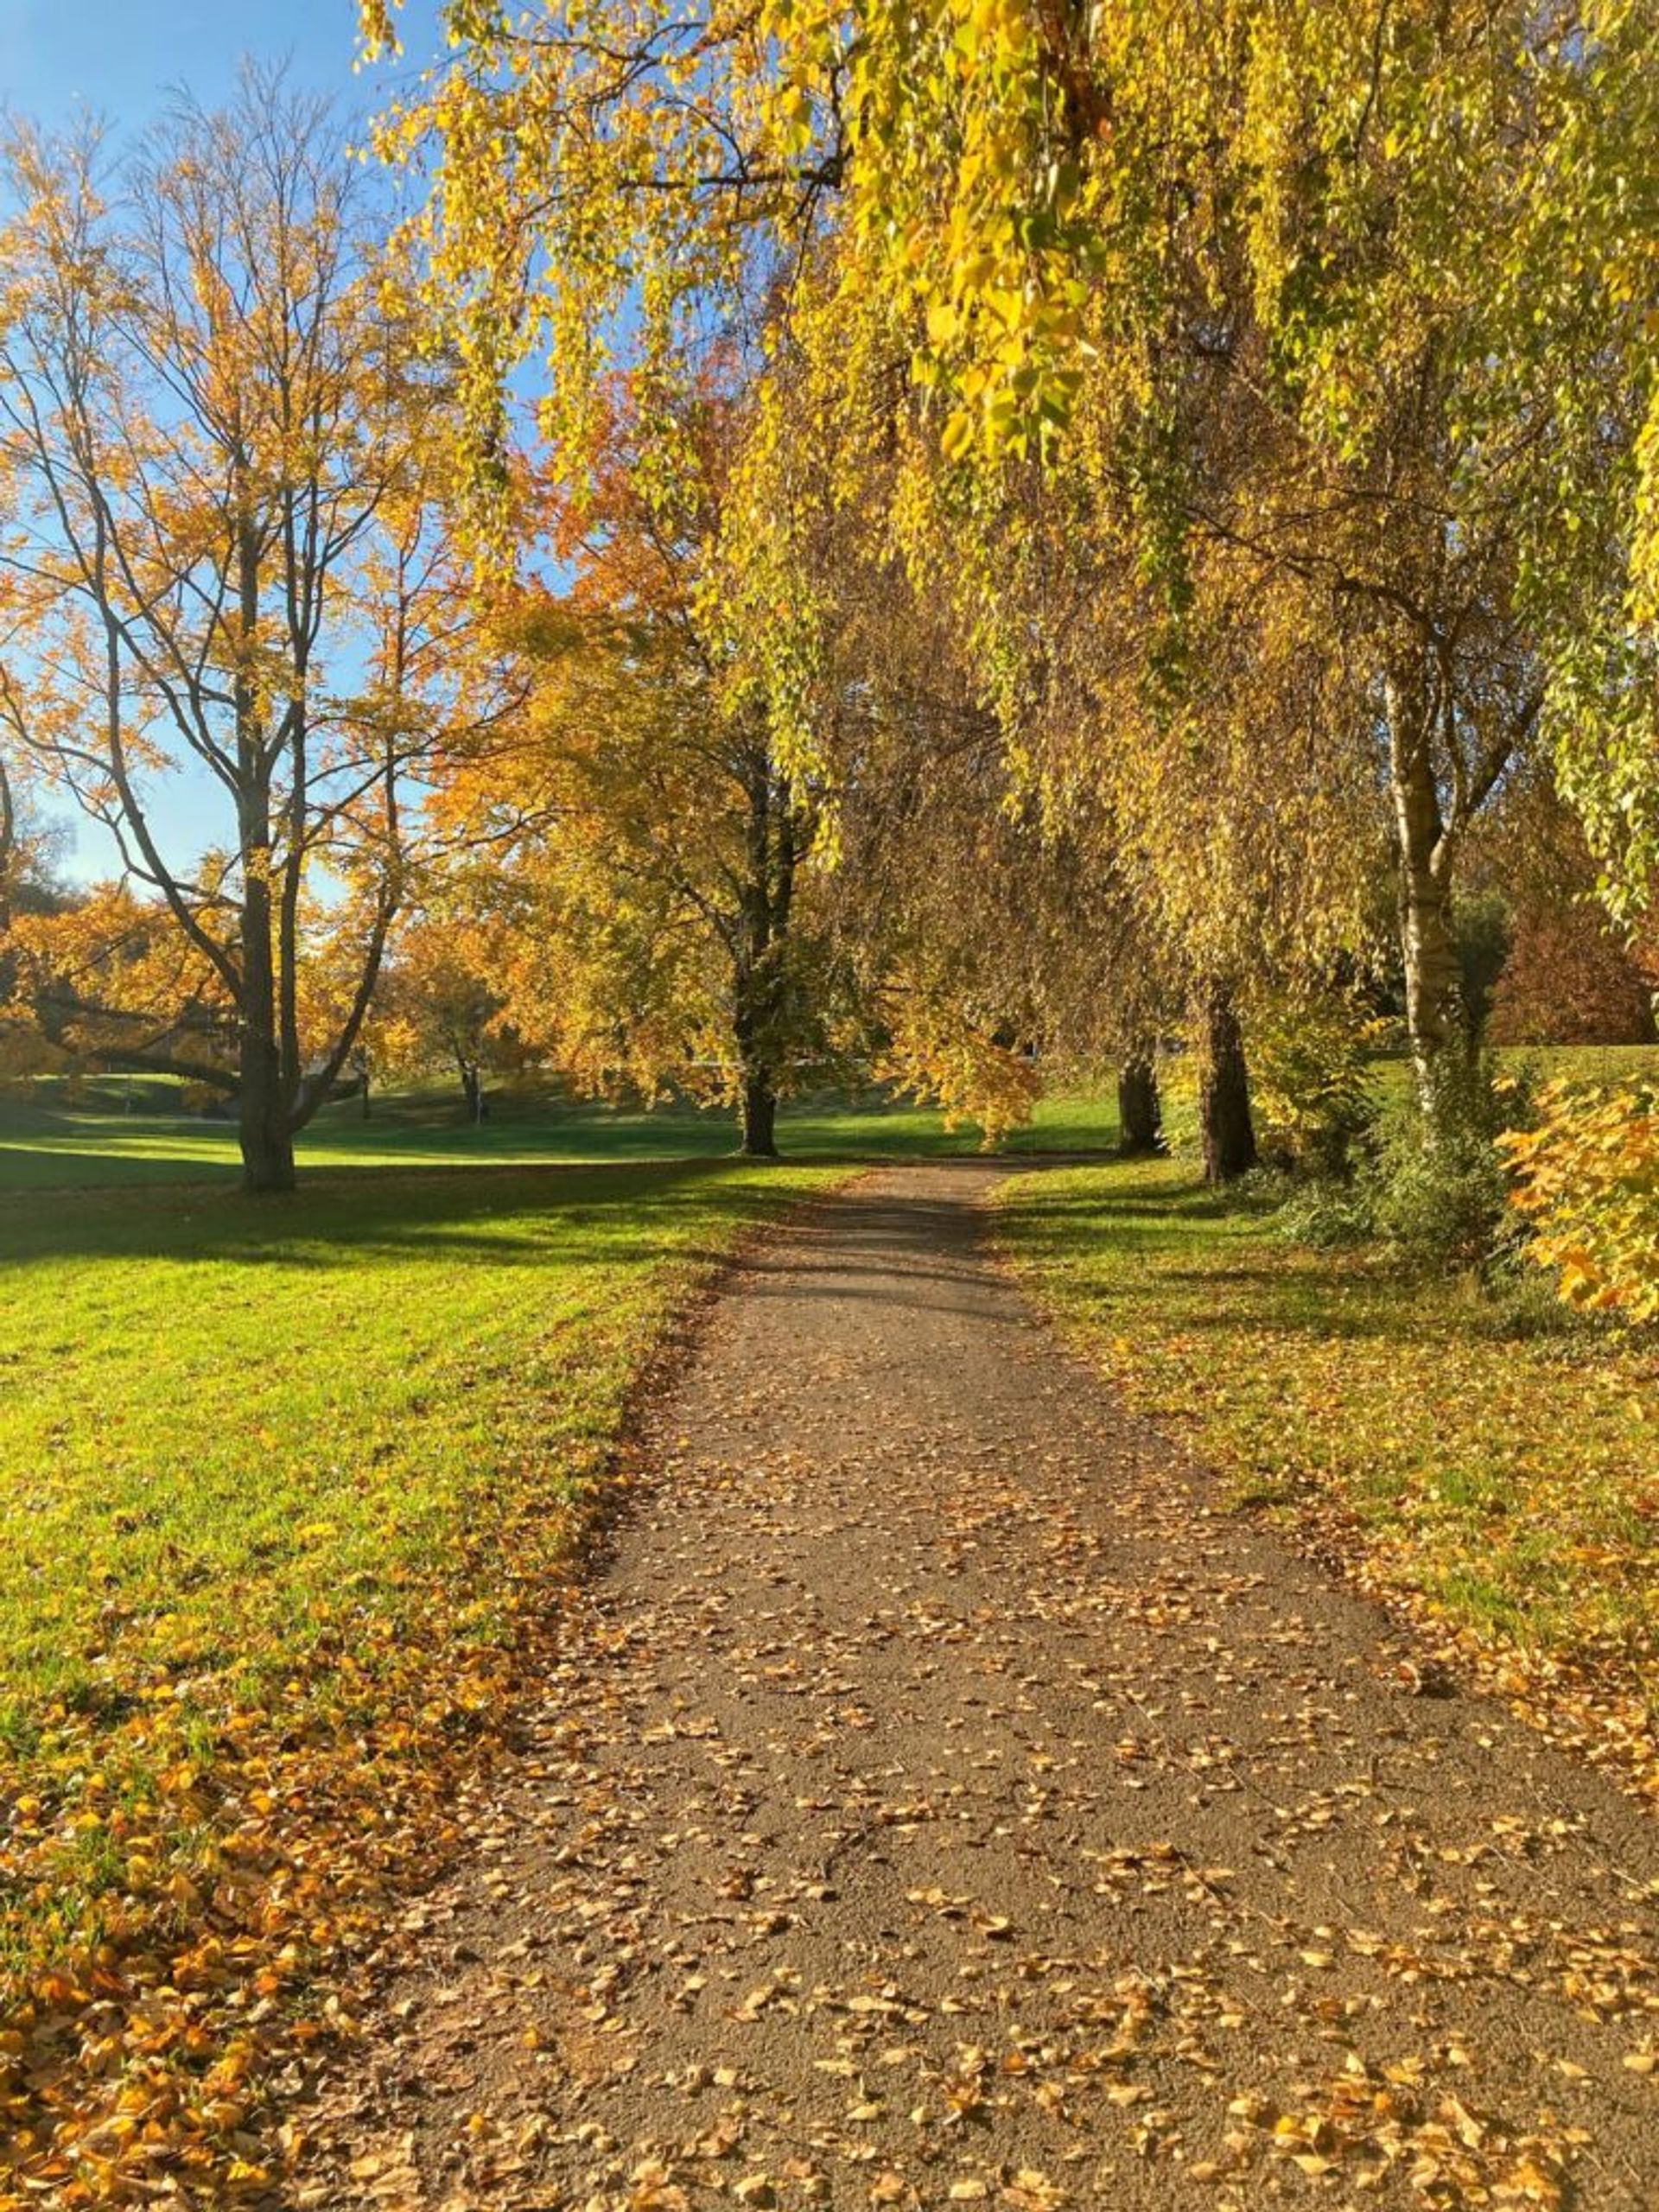 A autumn path strewn with golden leaves winds through a park.